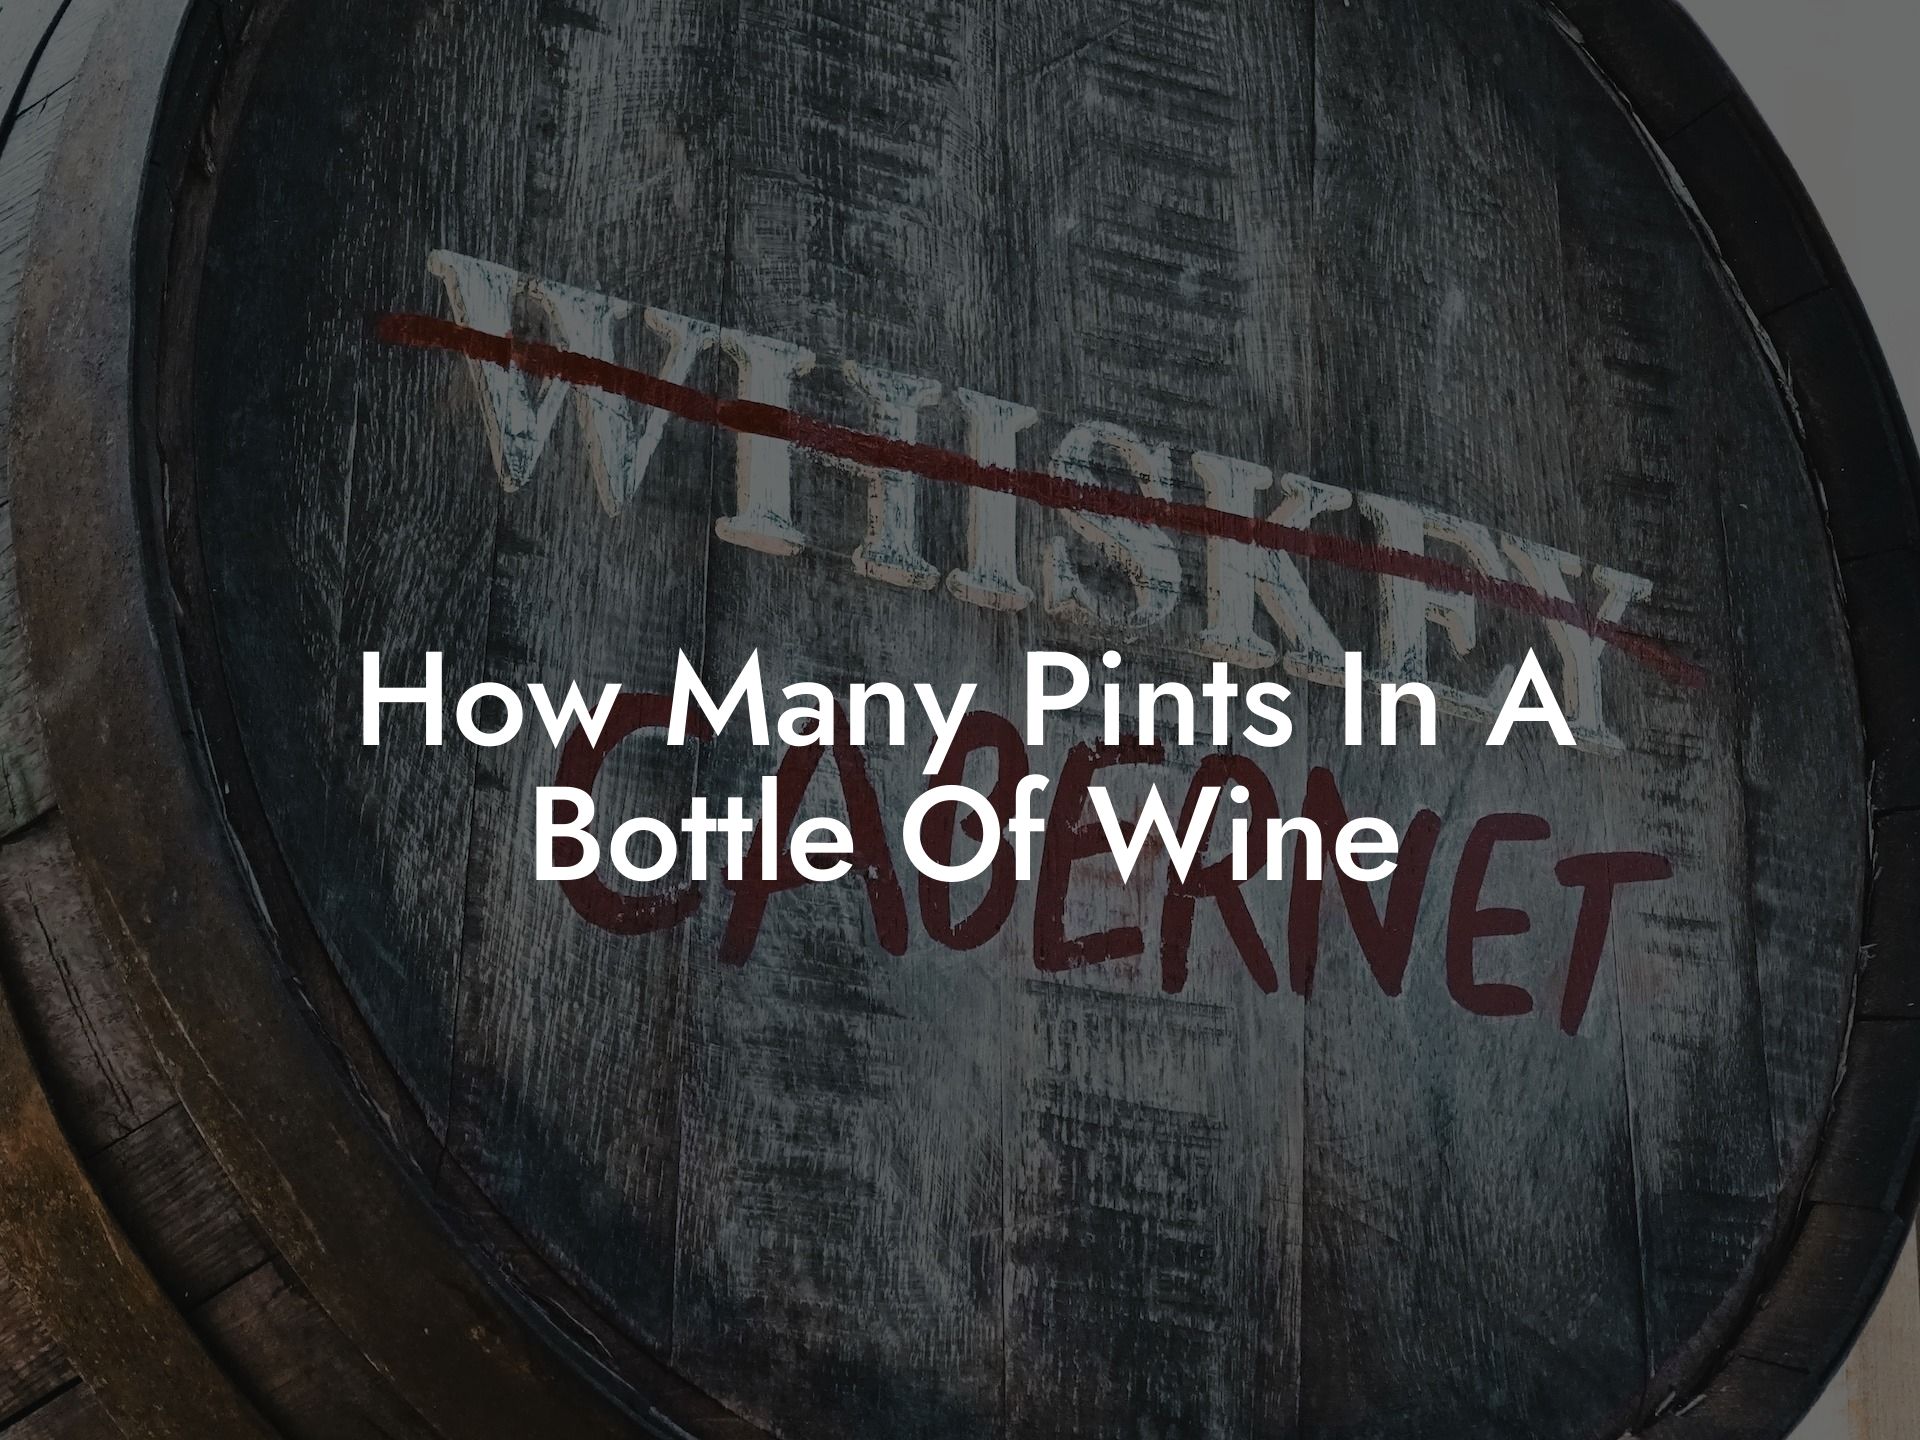 How Many Pints In A Bottle Of Wine